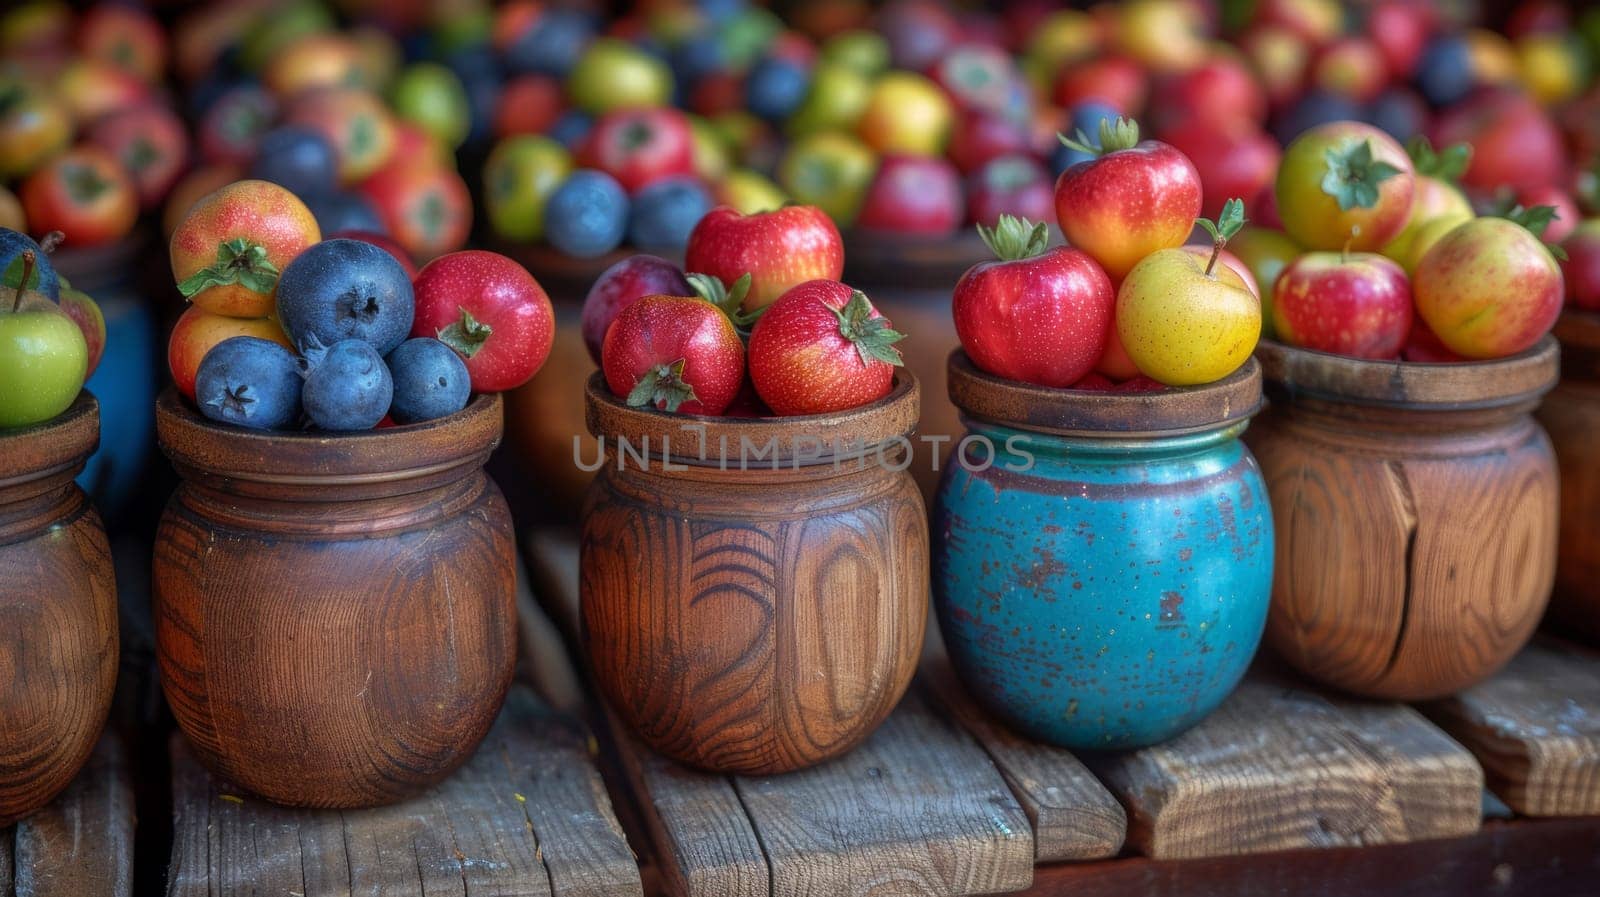 A row of wooden crates filled with apples and blueberries